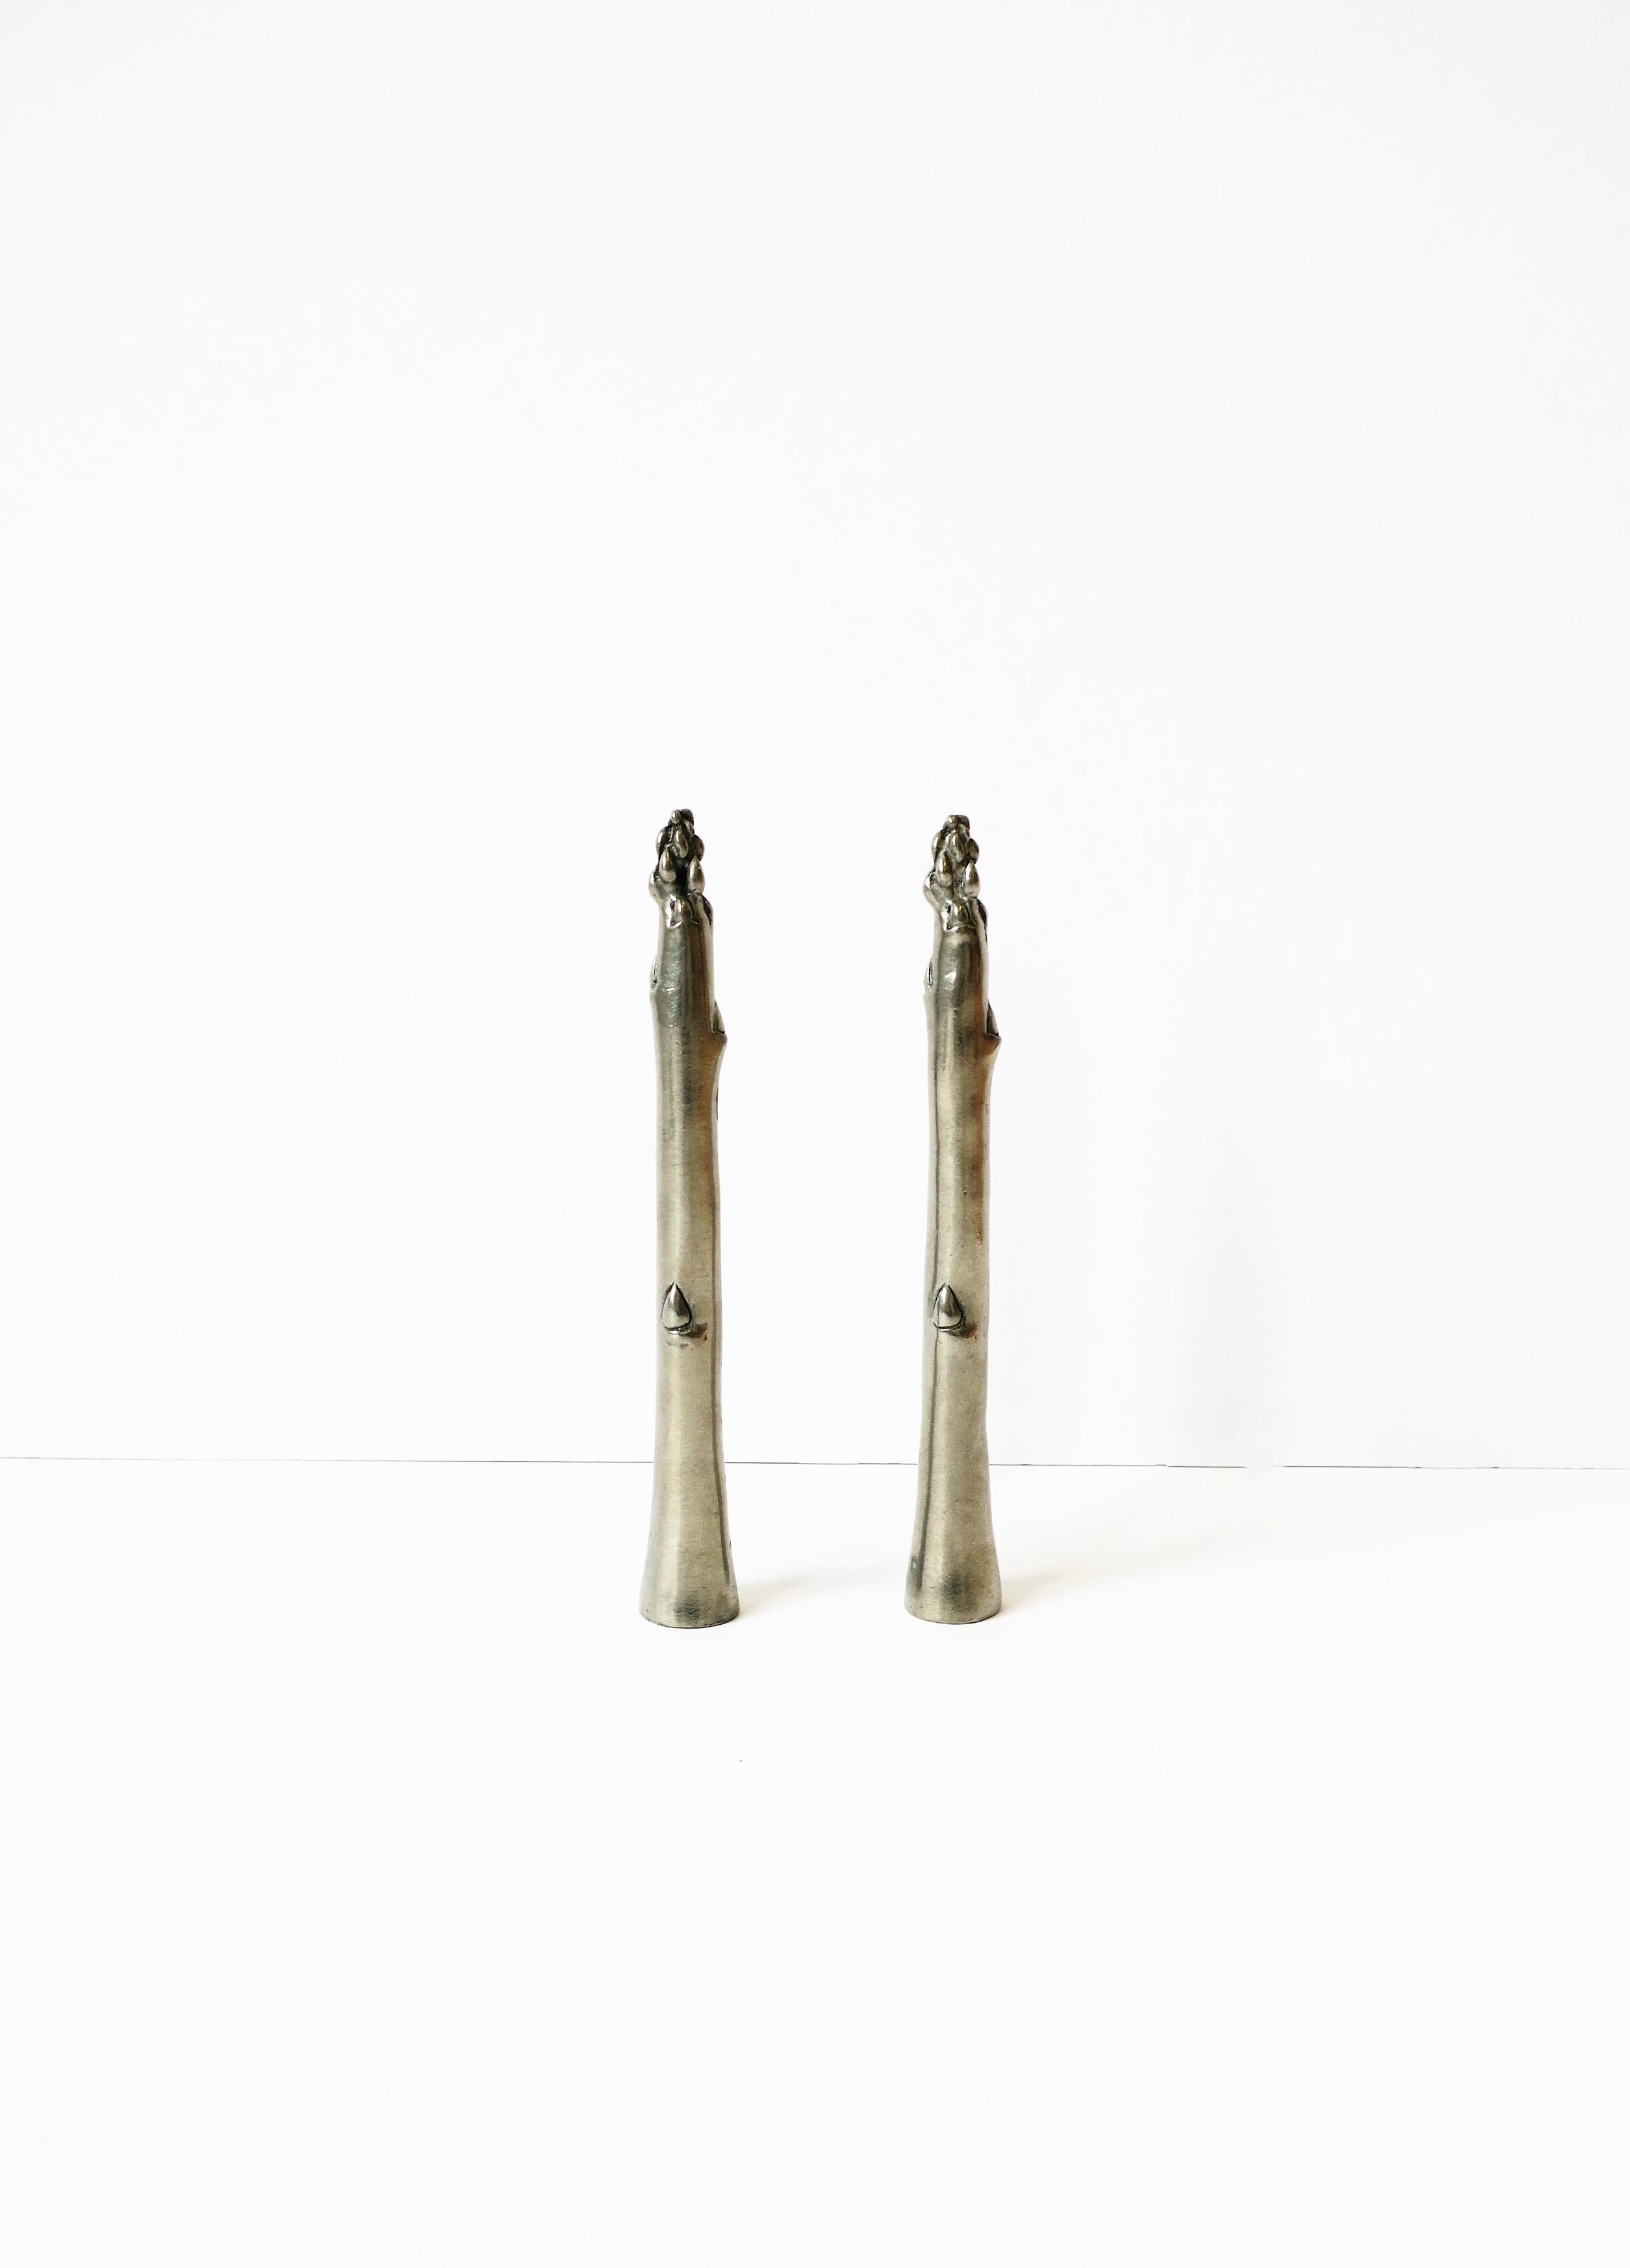 asparagus salt and pepper shakers